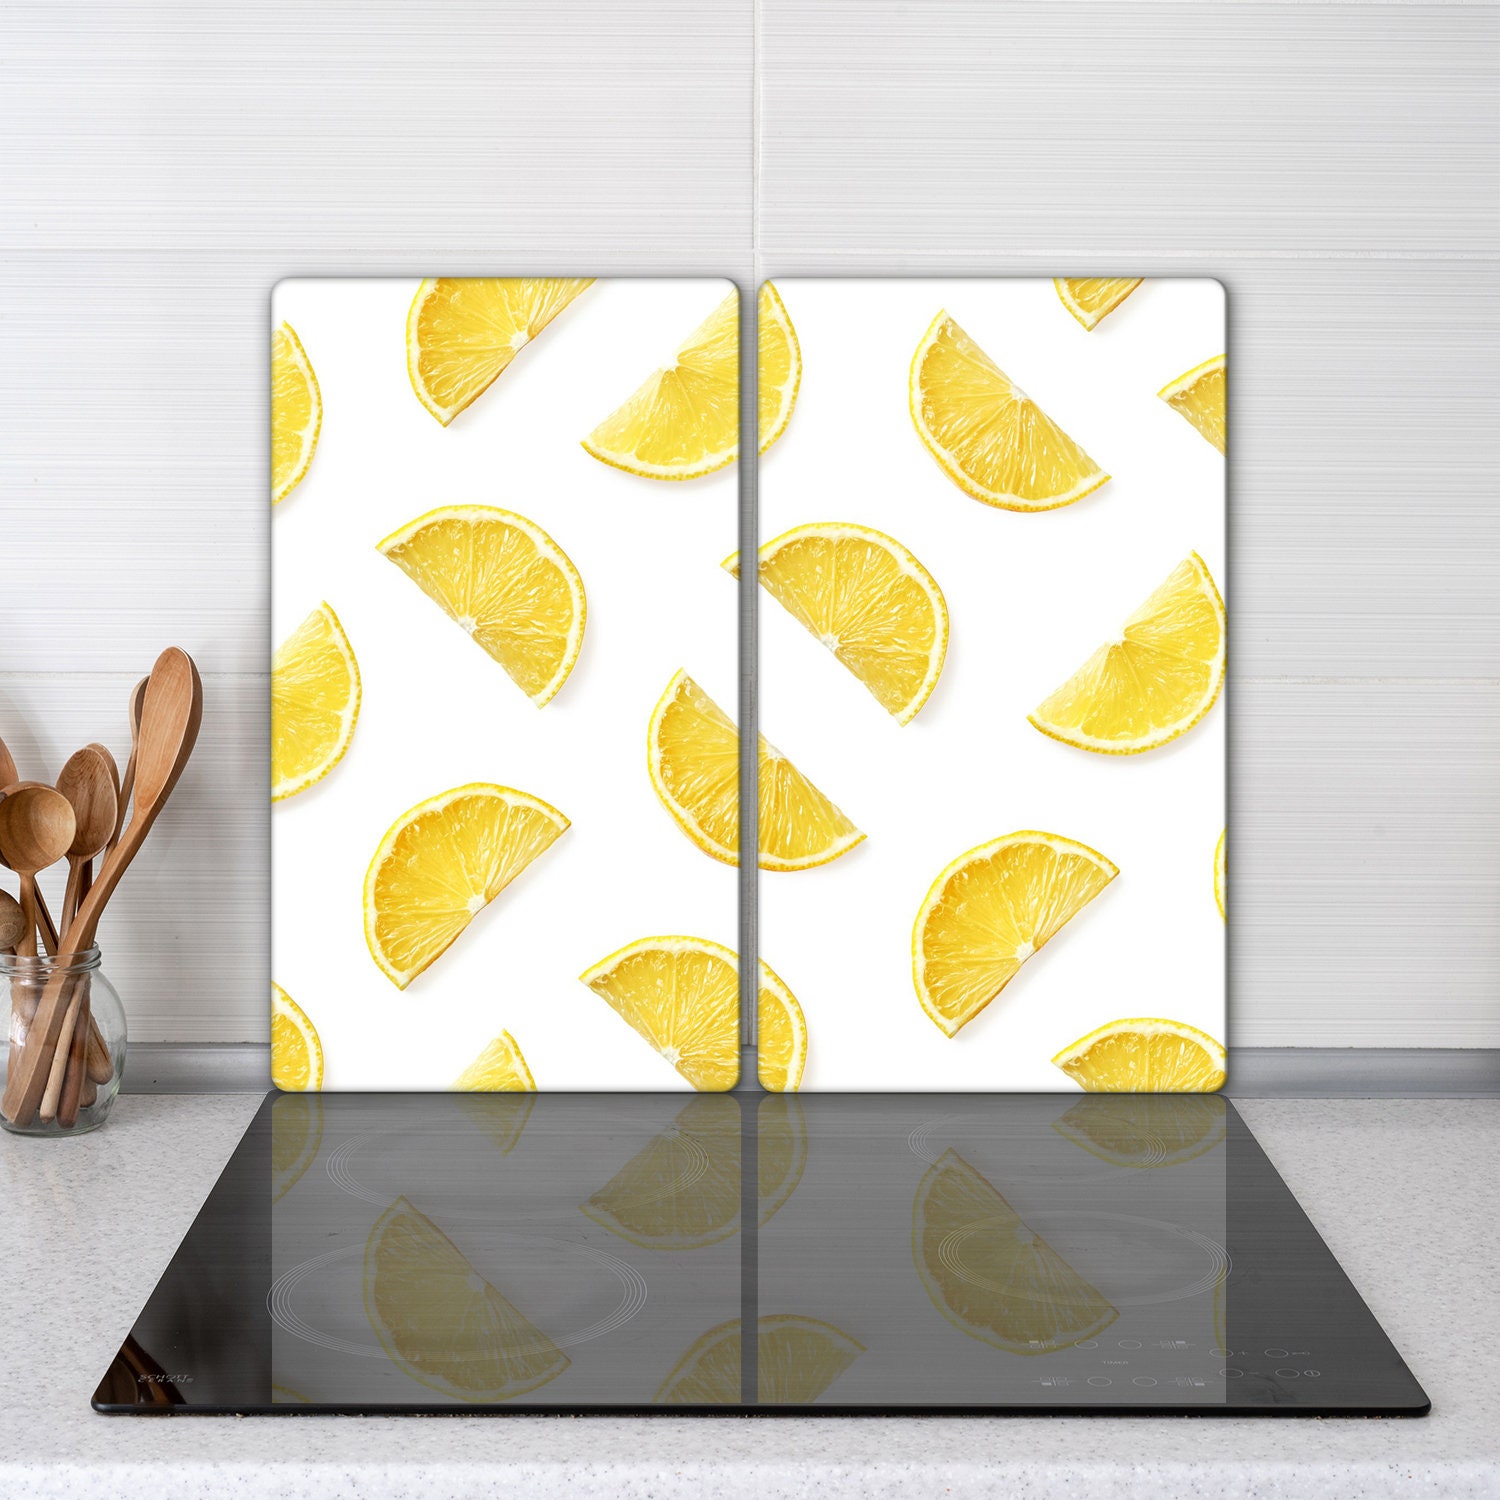 Gigantic KITCHEN BOARD & Induction Cooktop Cover Lemon With Mint 